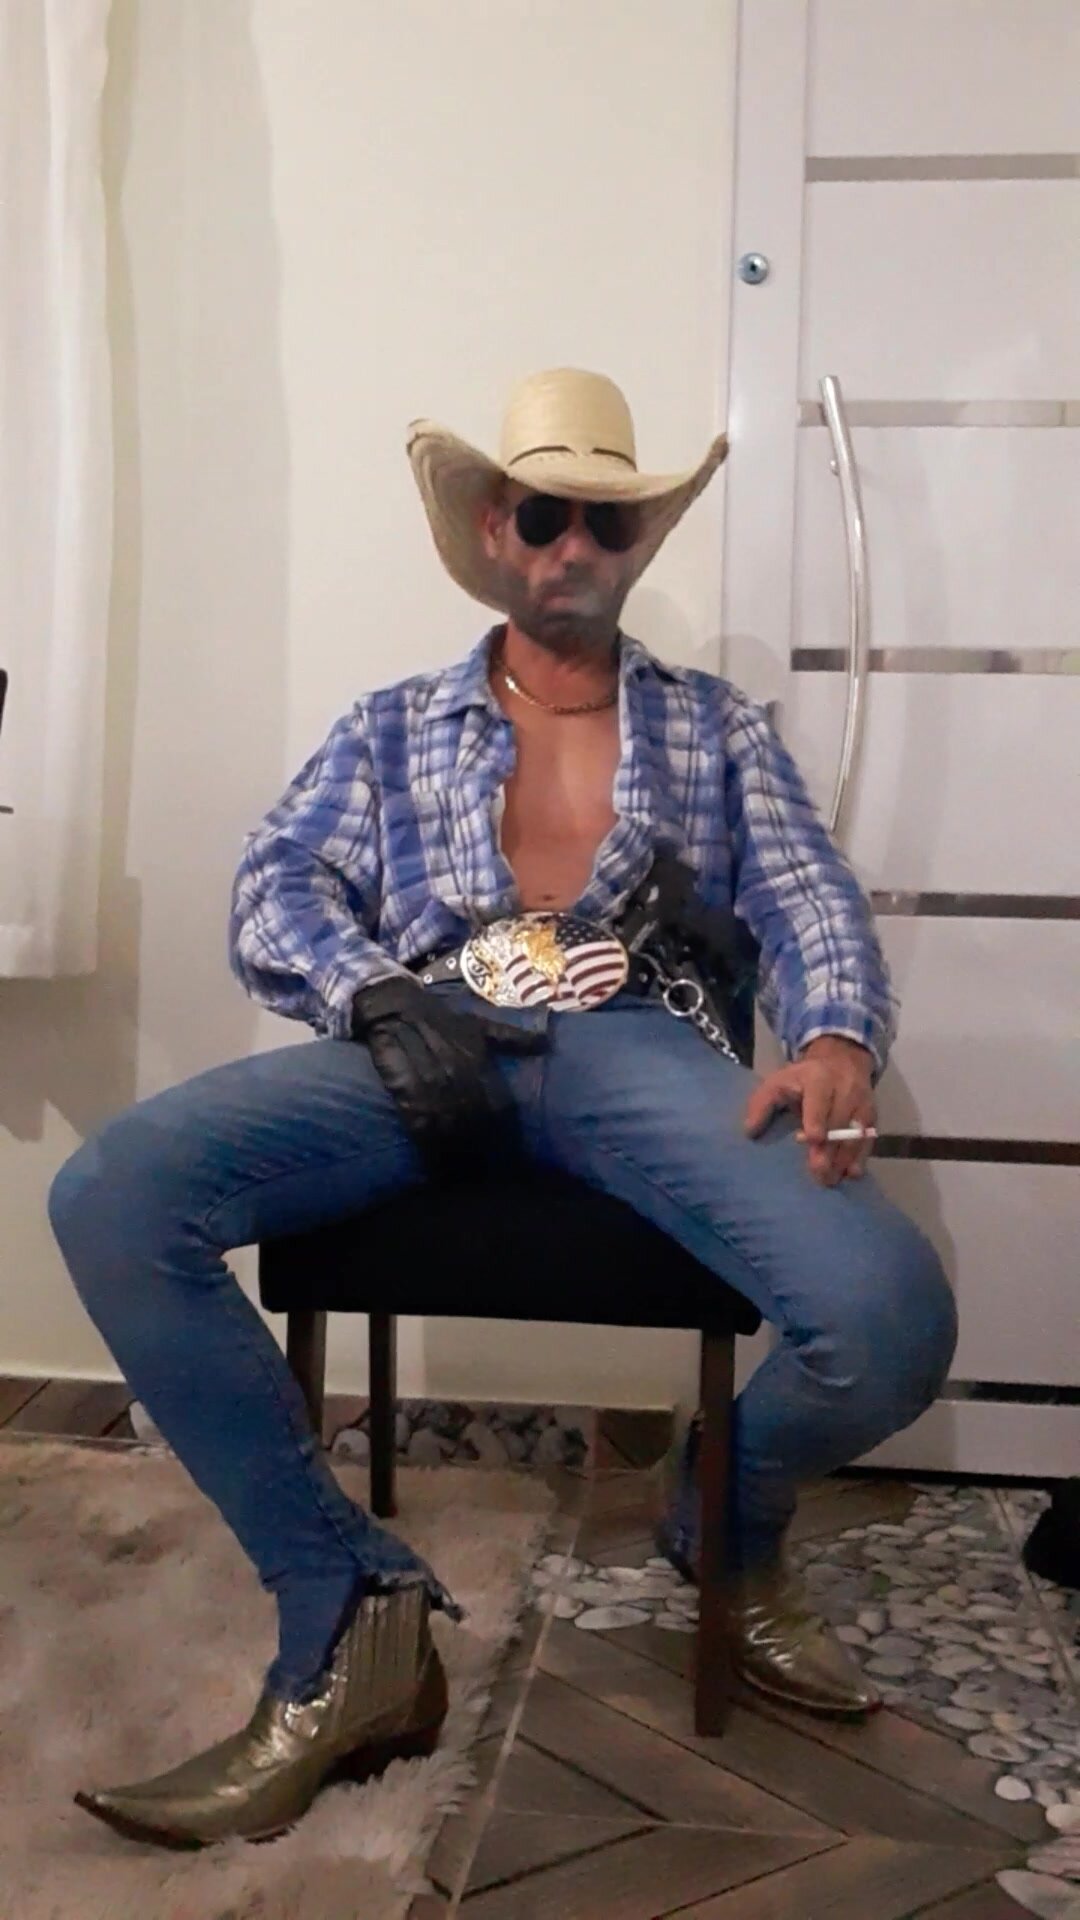 Redneck in style, smoking and showing off on cam.